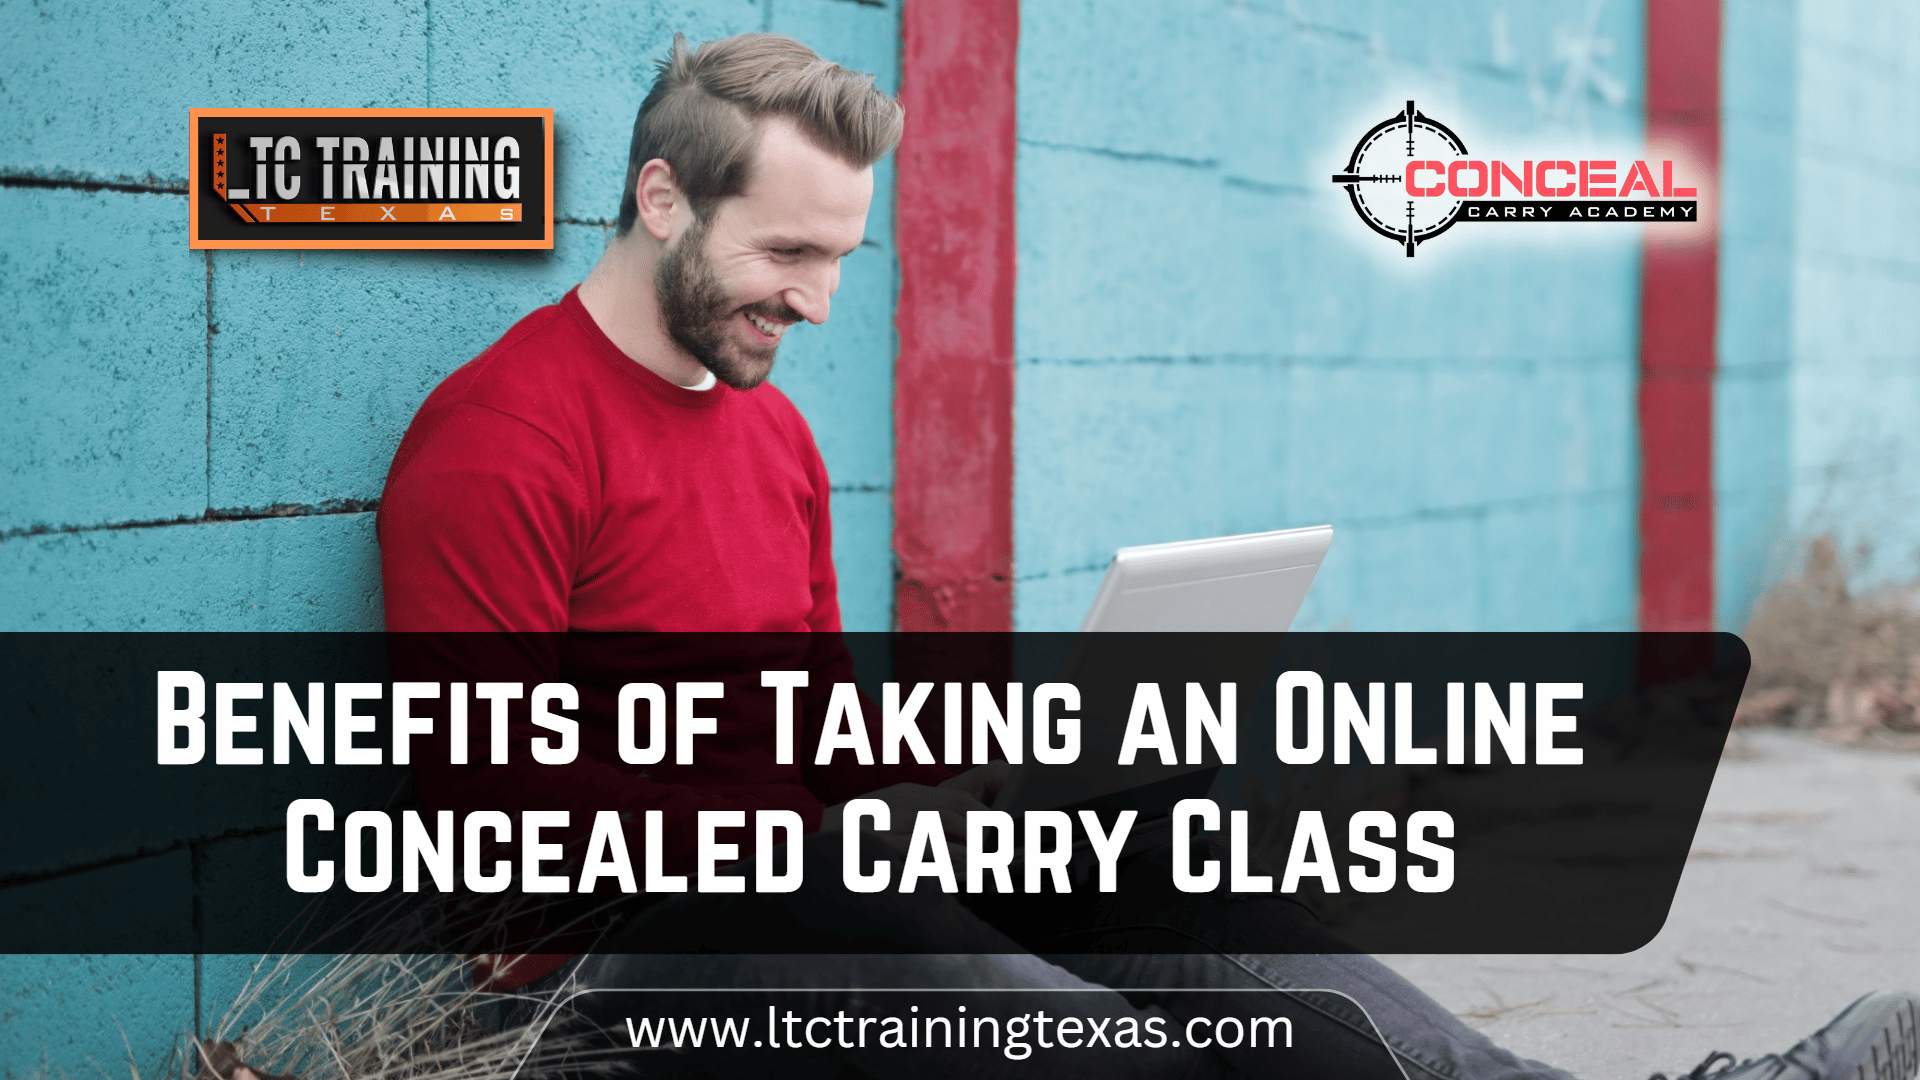 Benefits of Taking an Online Concealed Carry Class 1